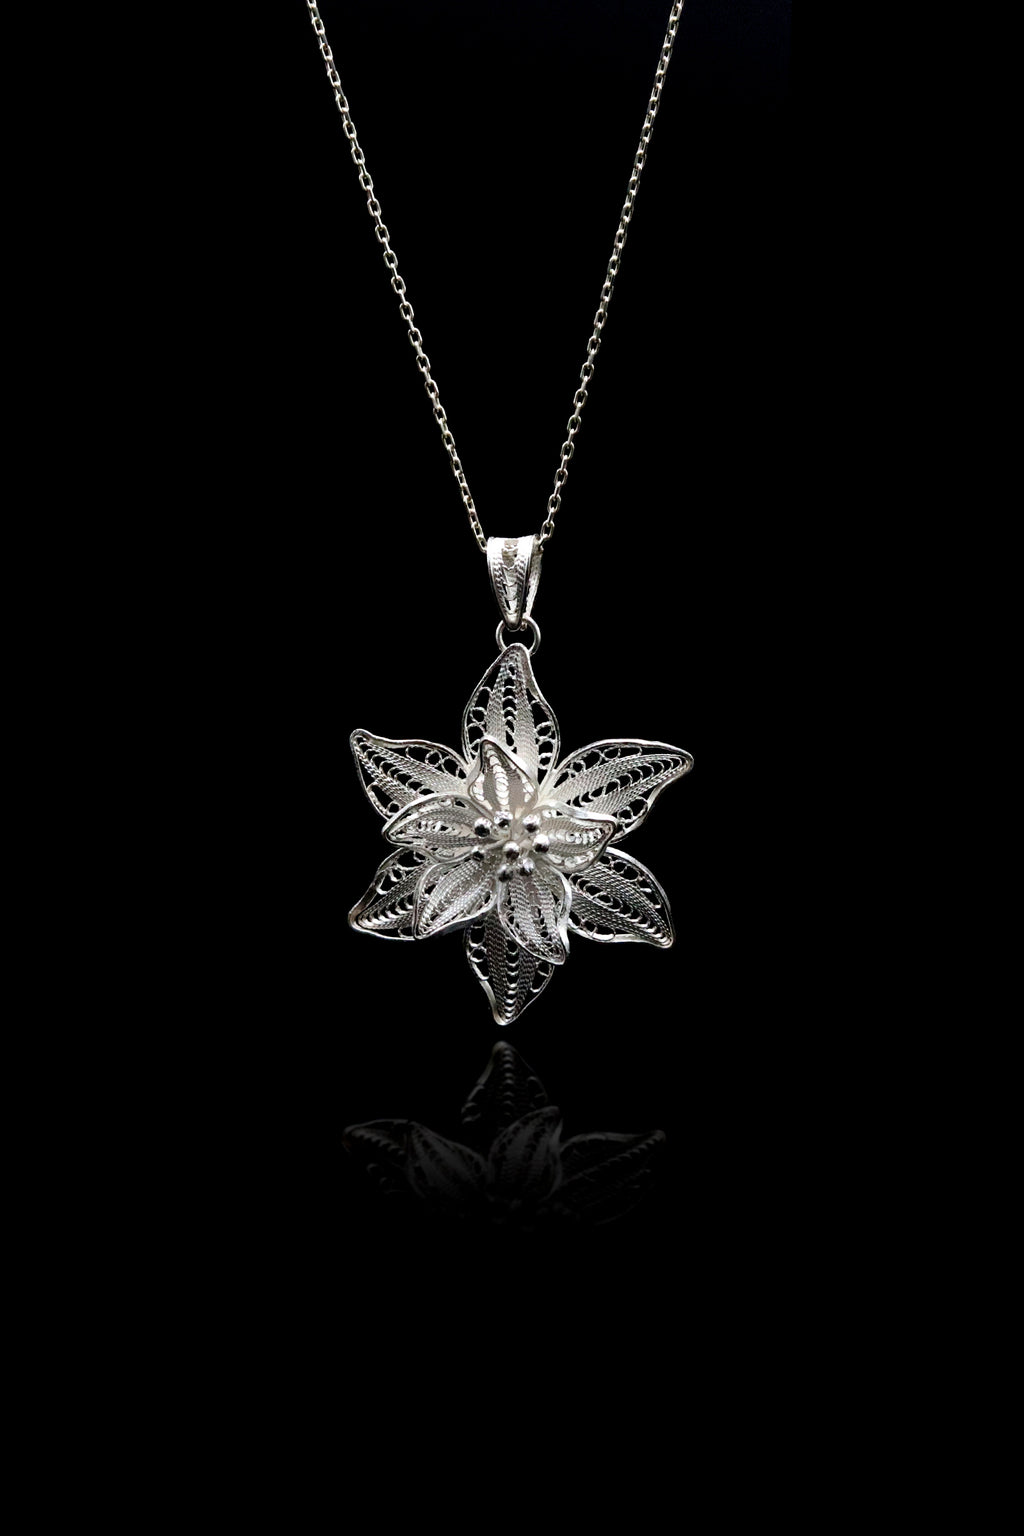 Lily Model Filigree Sterling Silver Necklace (NG201019573)